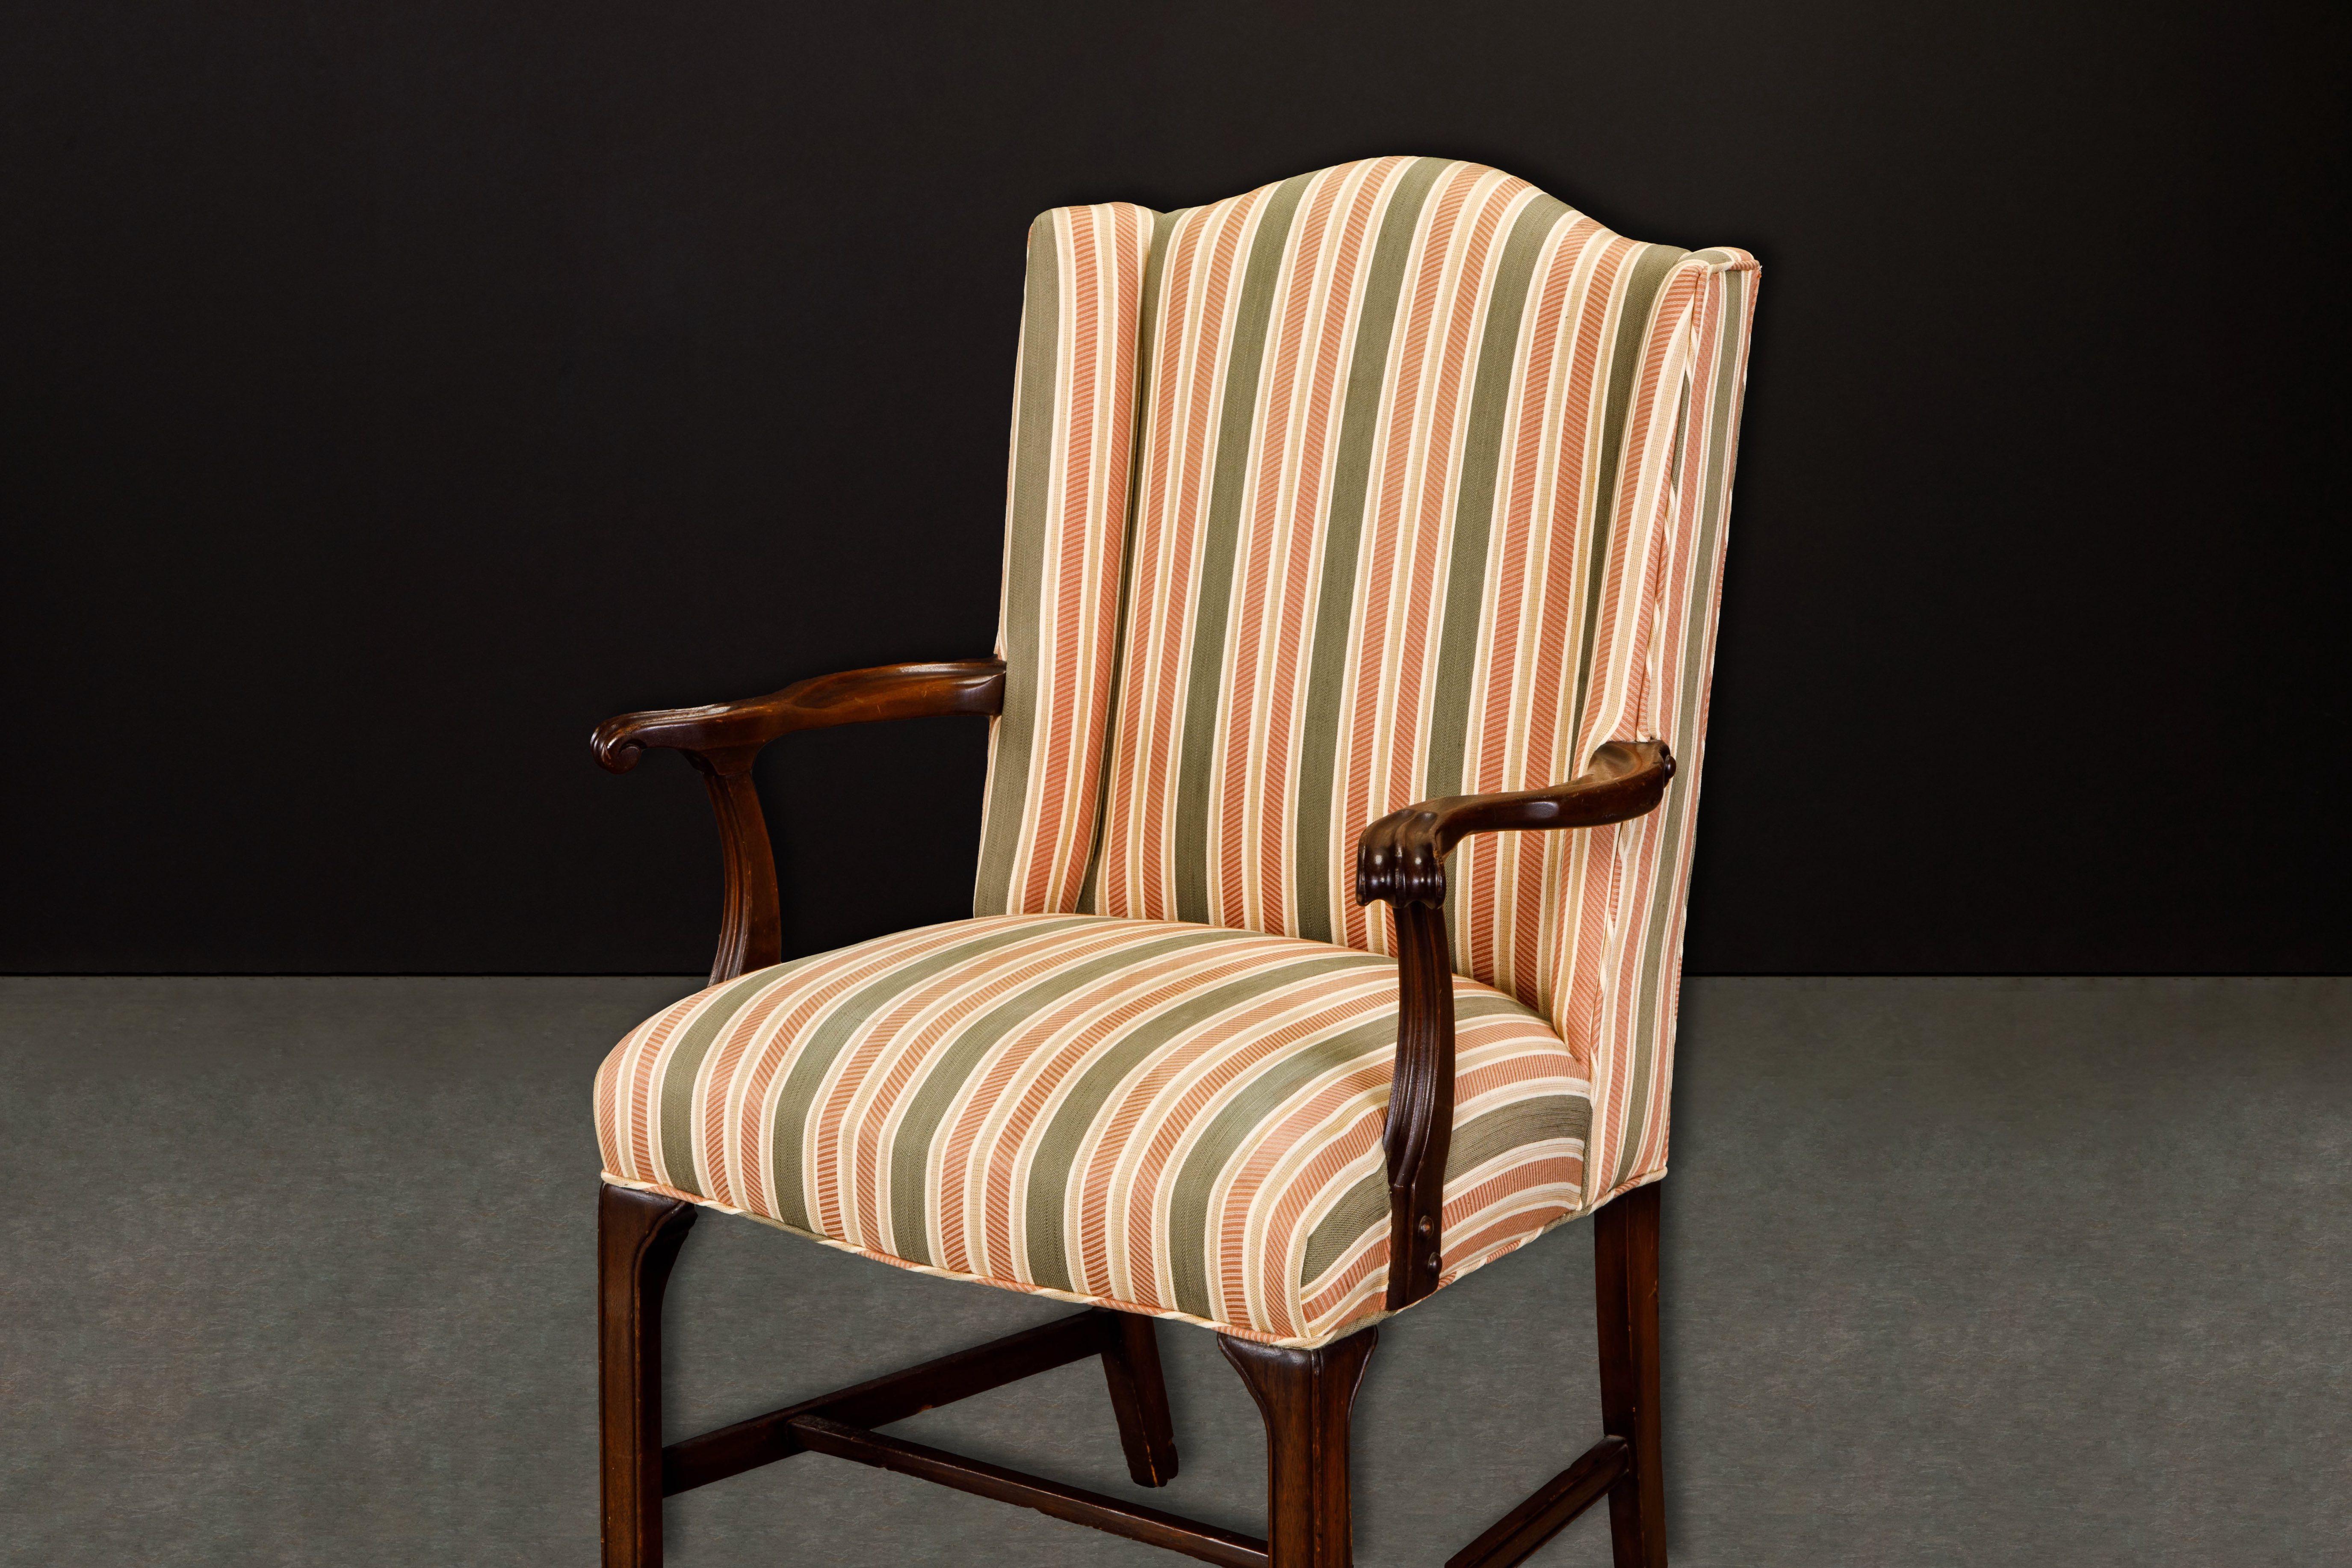 Gainsborough Wingback Armchair Upholstered in Striped Fabric 4